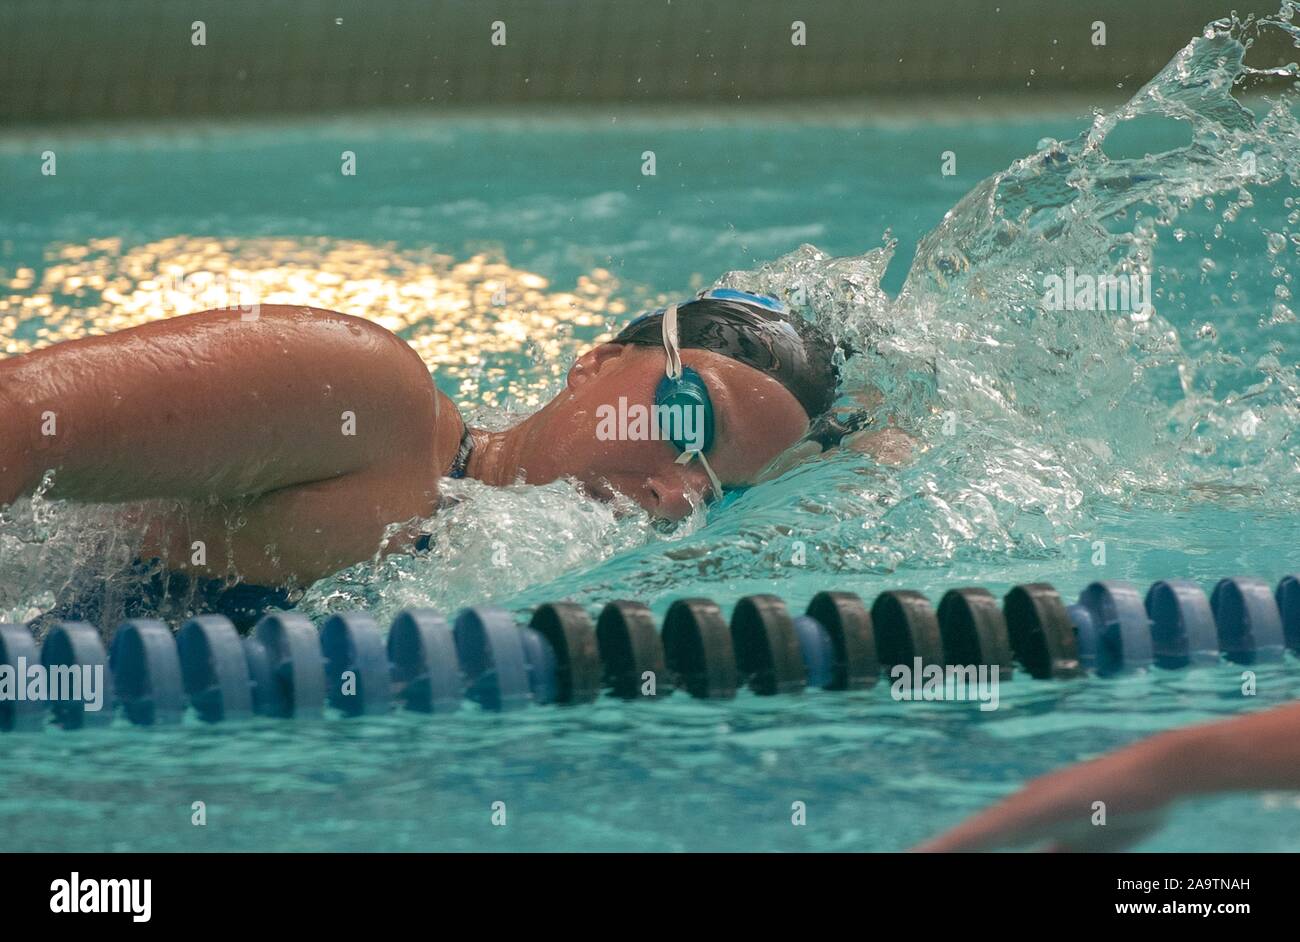 Obscured profile shot, from the chest up, of a Johns Hopkins University Men's Swim team member, moving through the water while performing a sidestroke, January 14, 2005. From the Homewood Photography Collection. () Stock Photo